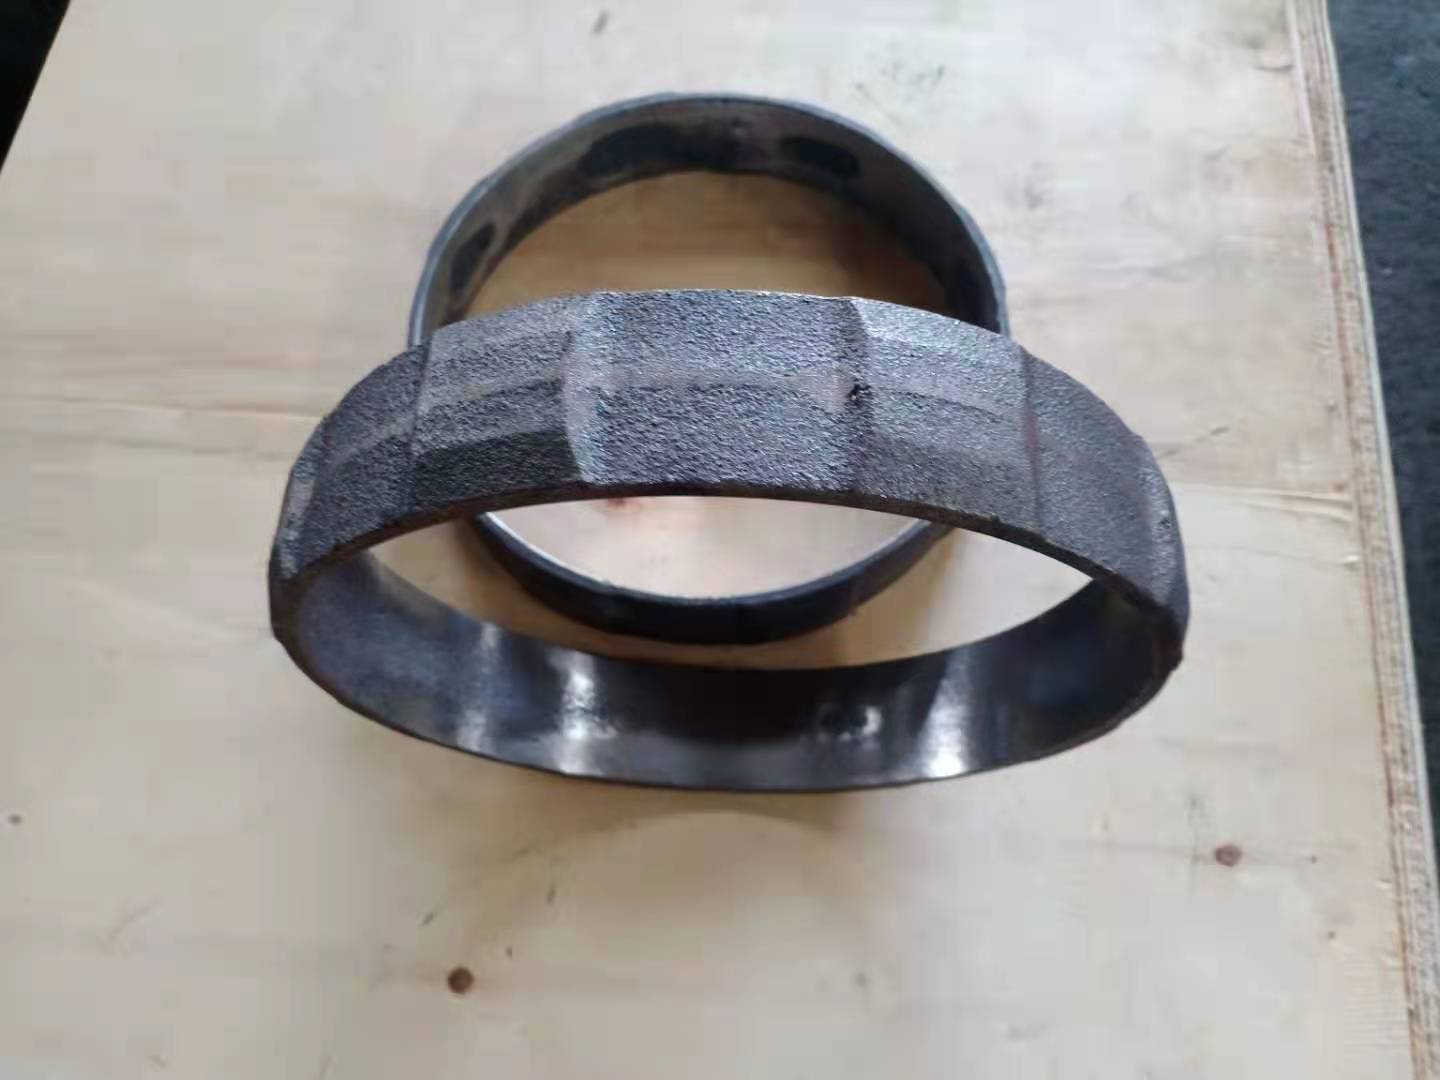 PIPE CLAMP Manufacturers, PIPE CLAMP Factory, Supply PIPE CLAMP